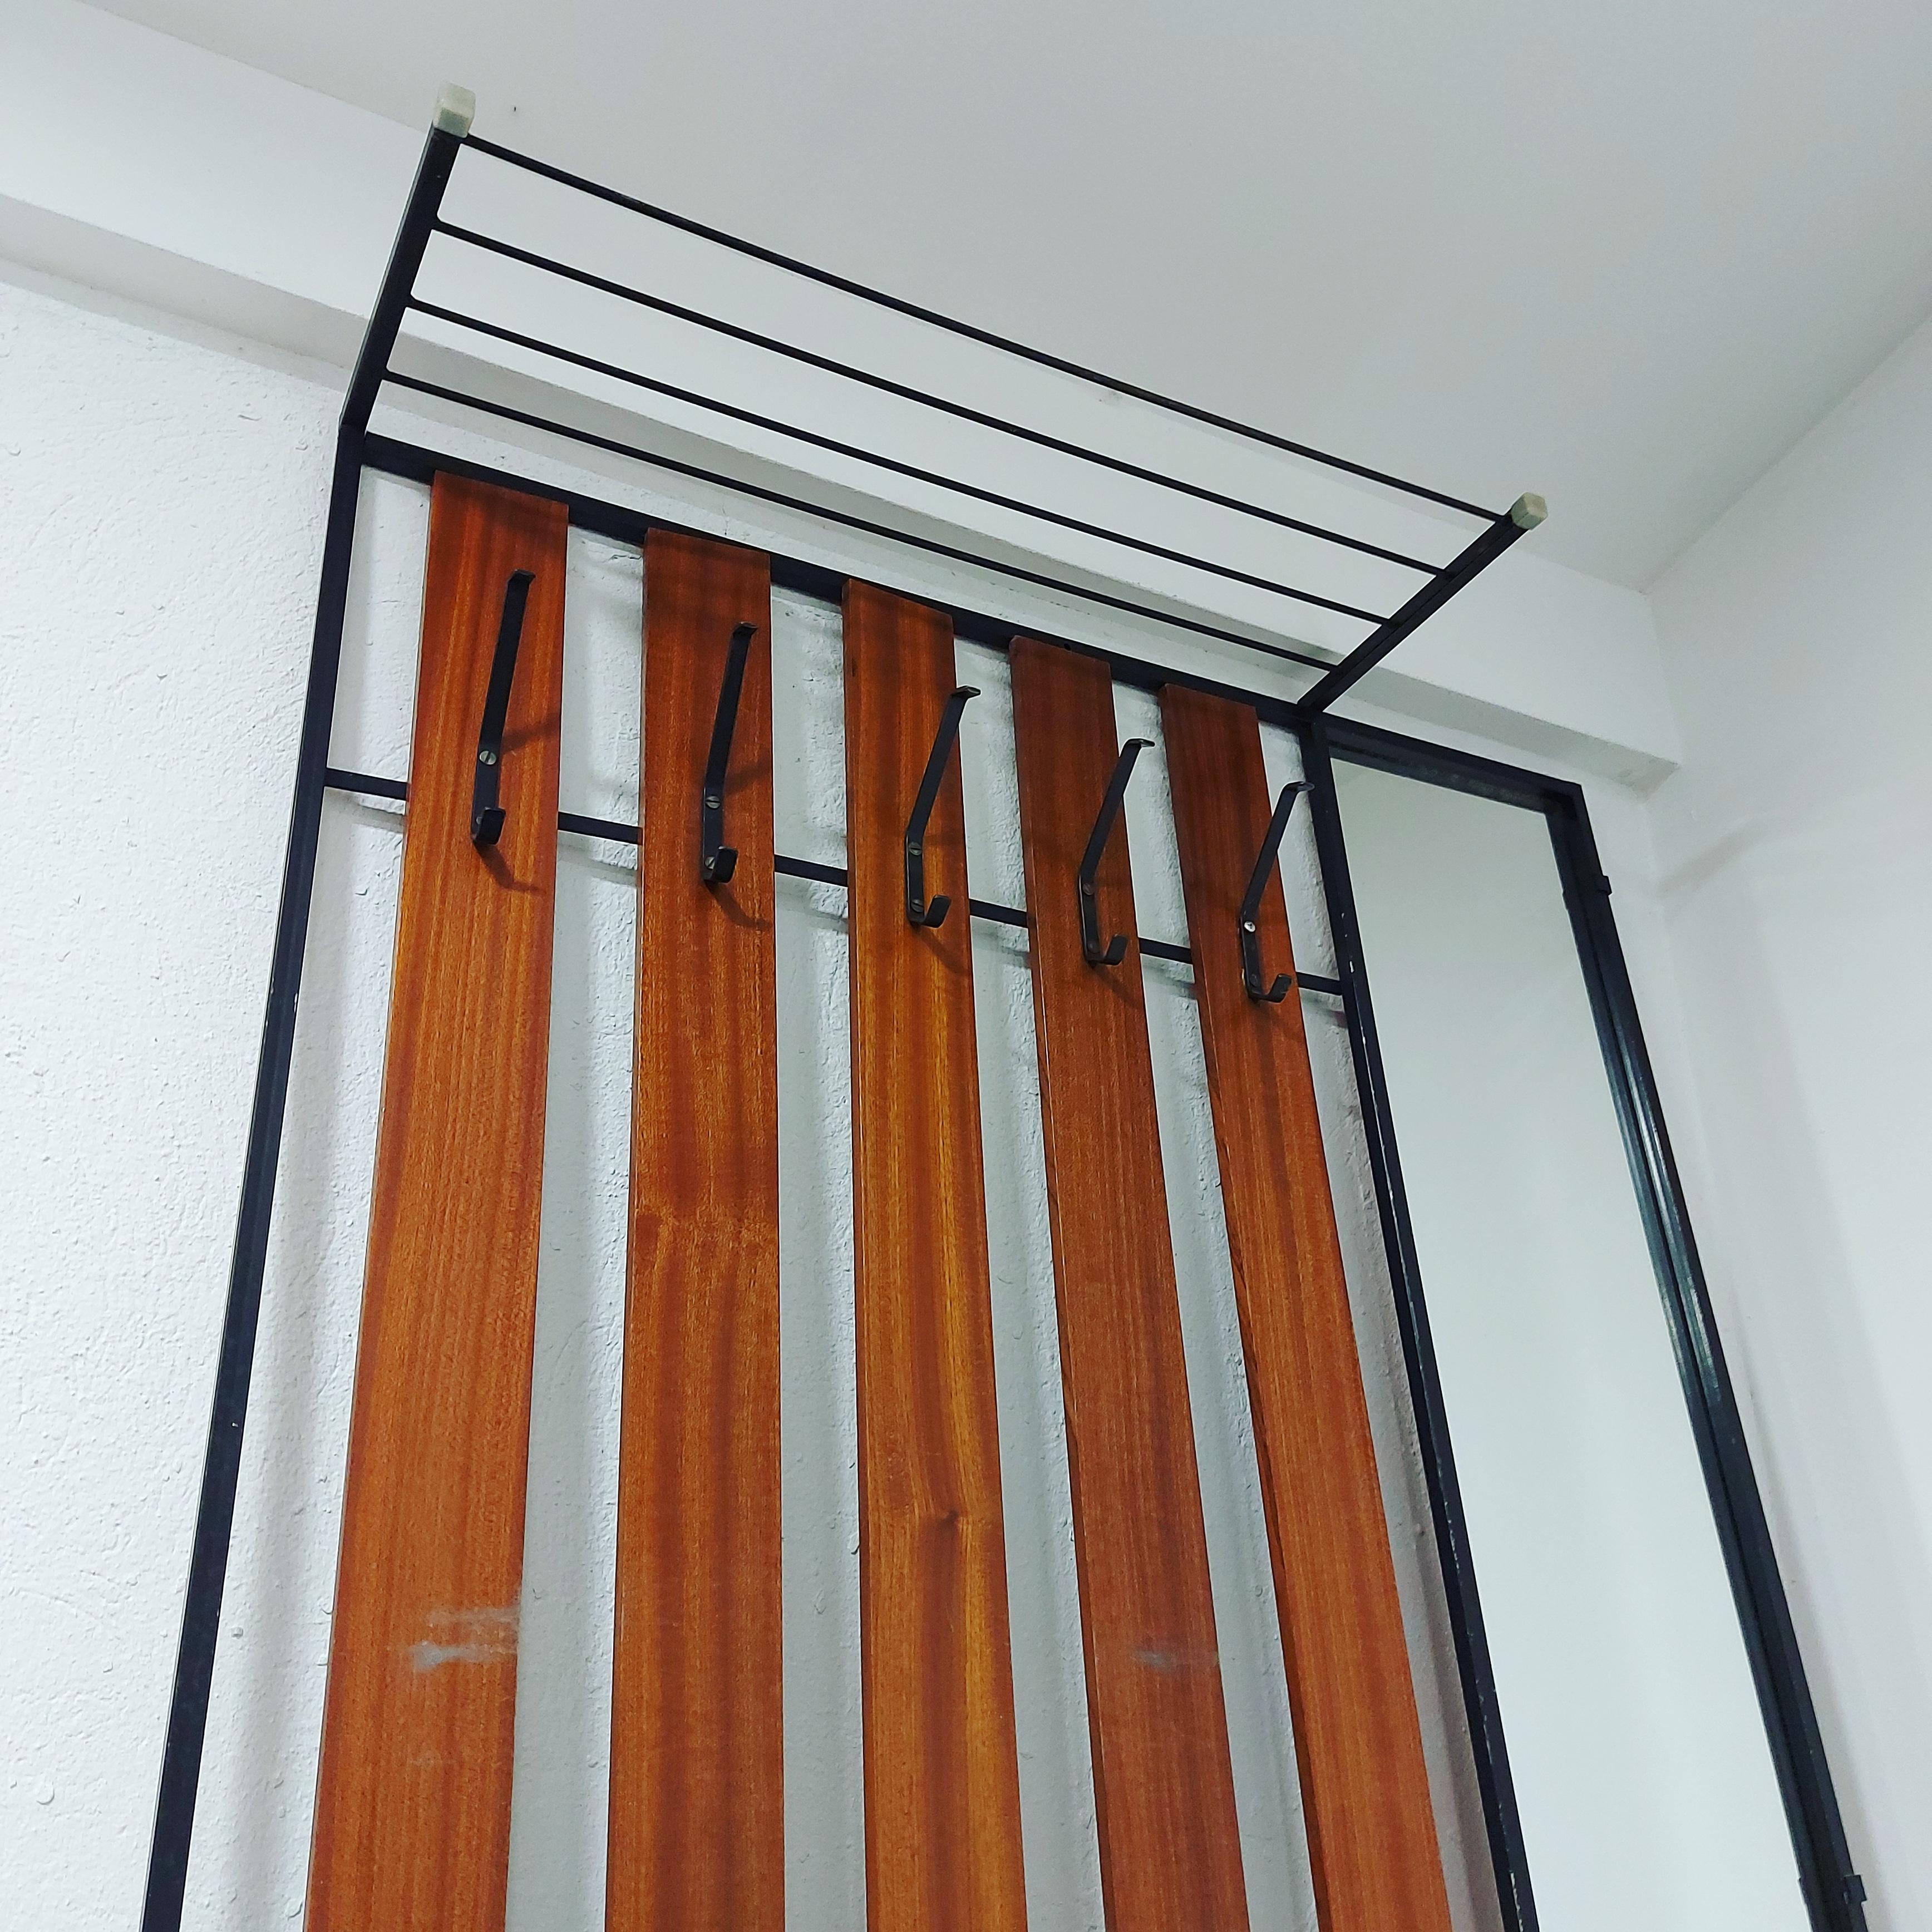 WALL Hanger 1960

Aluminium frame, with wooden panels and metal hangers.

Good vintage condition.